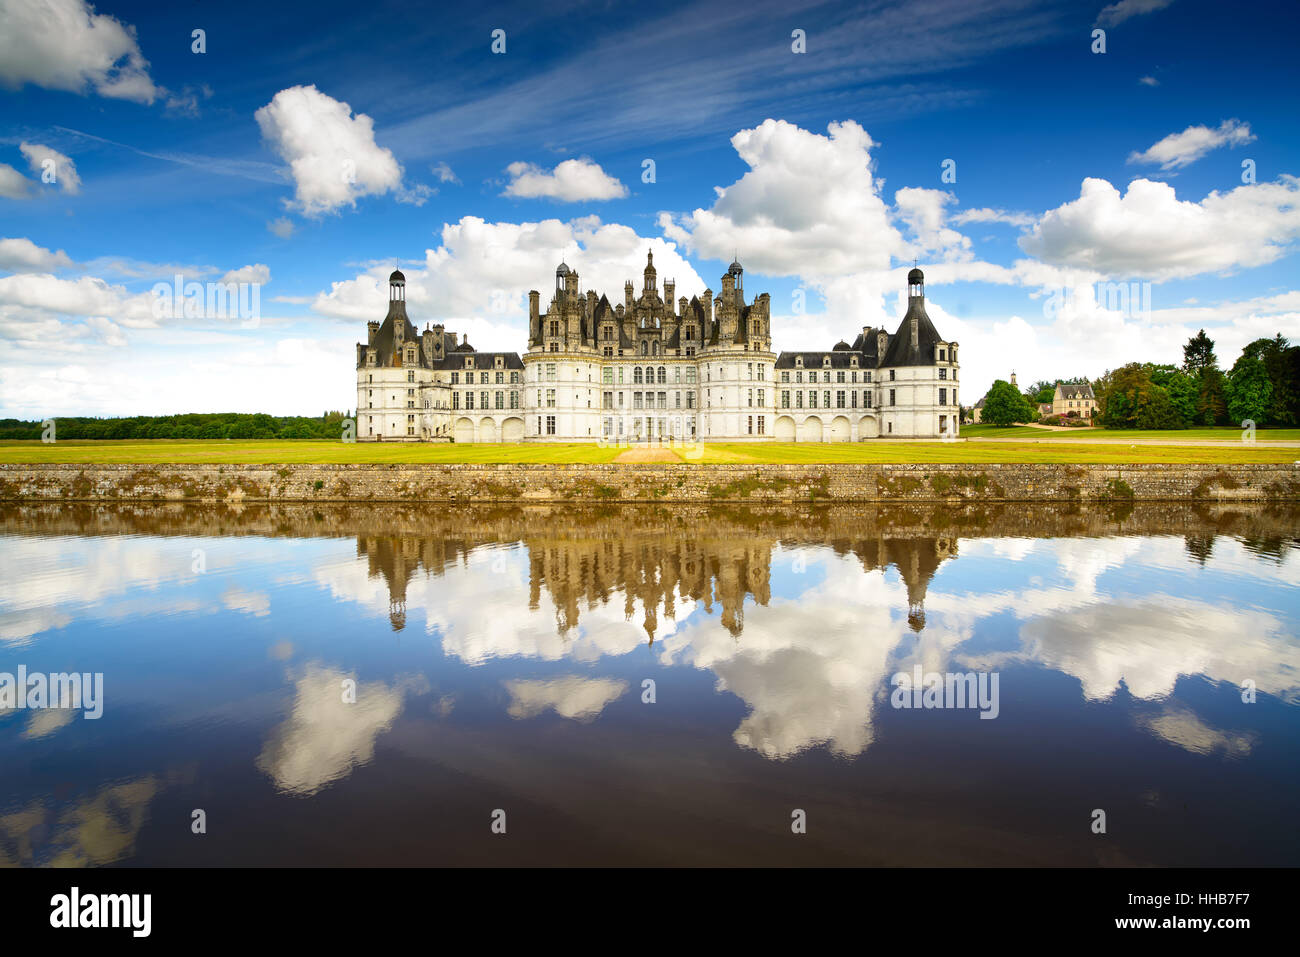 Chateau de Chambord, royal medieval french castle and reflection. Loire Valley, France, Europe. Unesco heritage site. Stock Photo